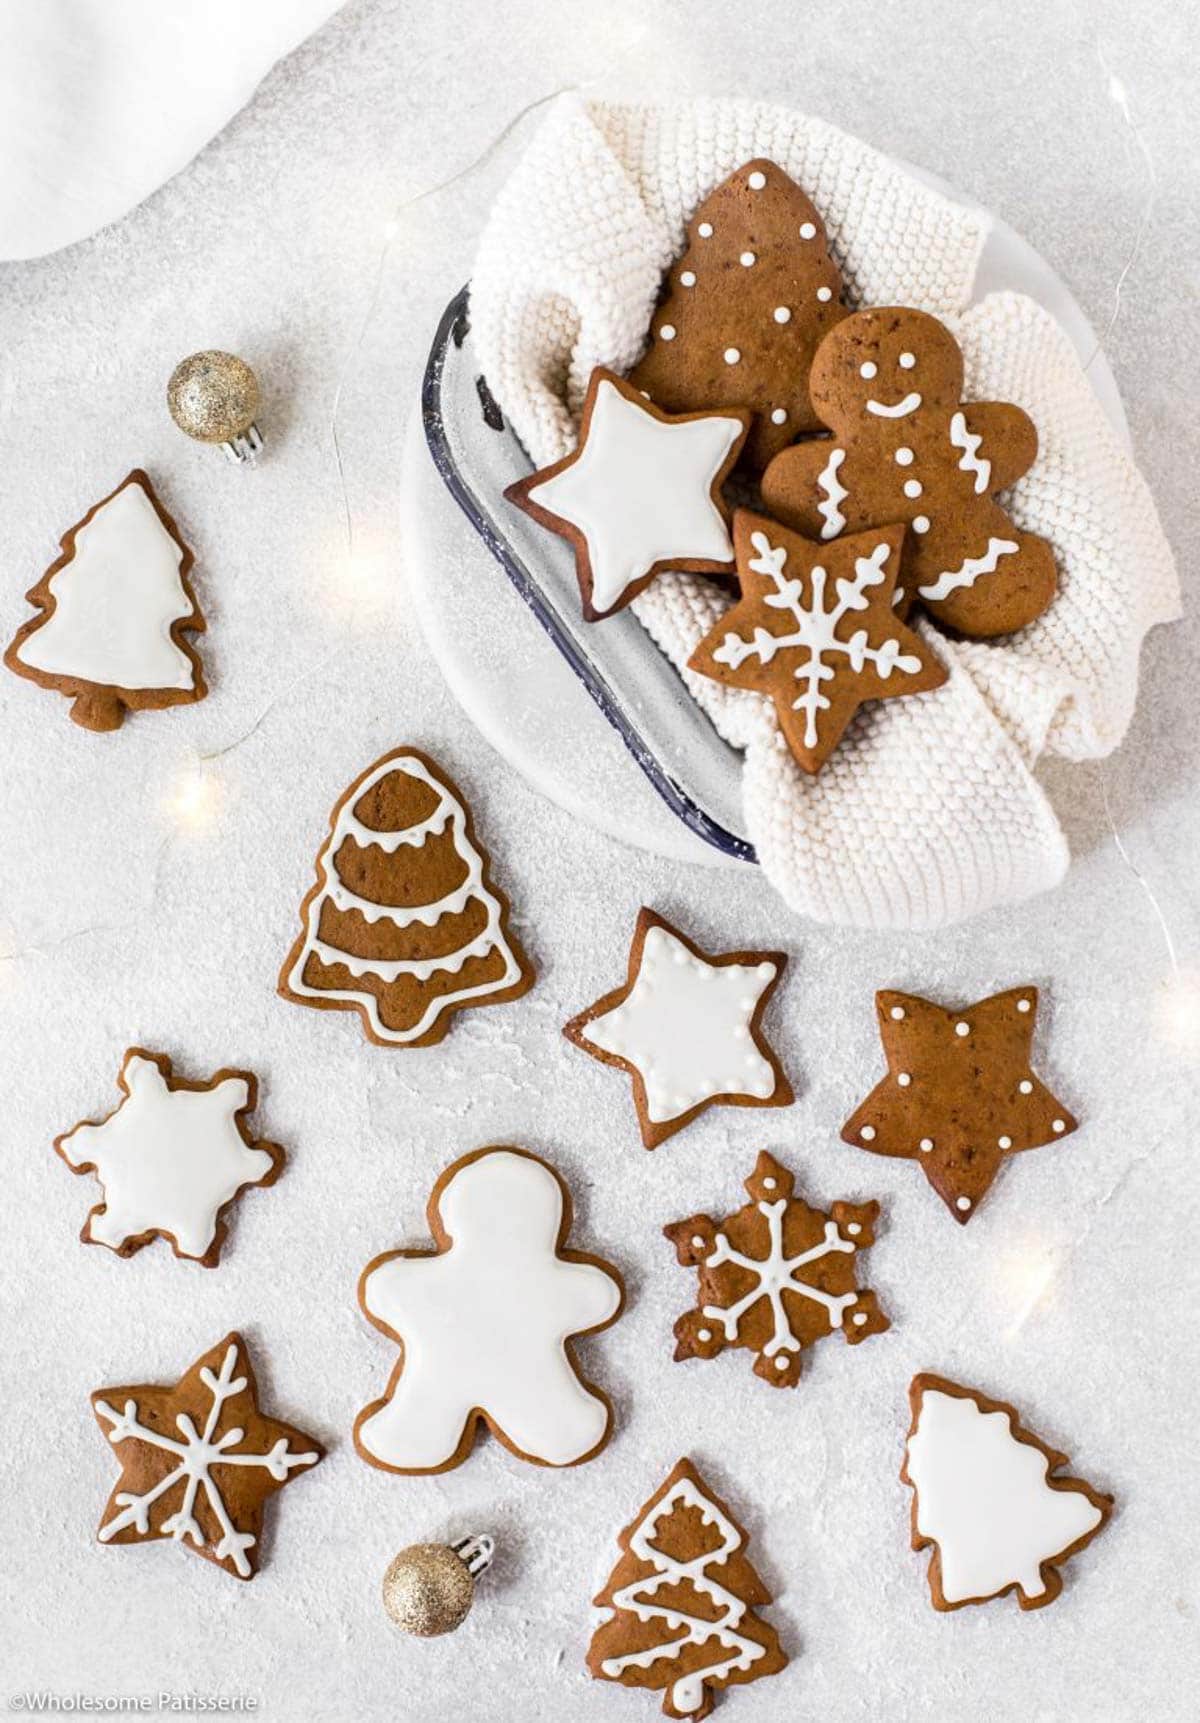 Overhead shot of decorated gingerbread cookies